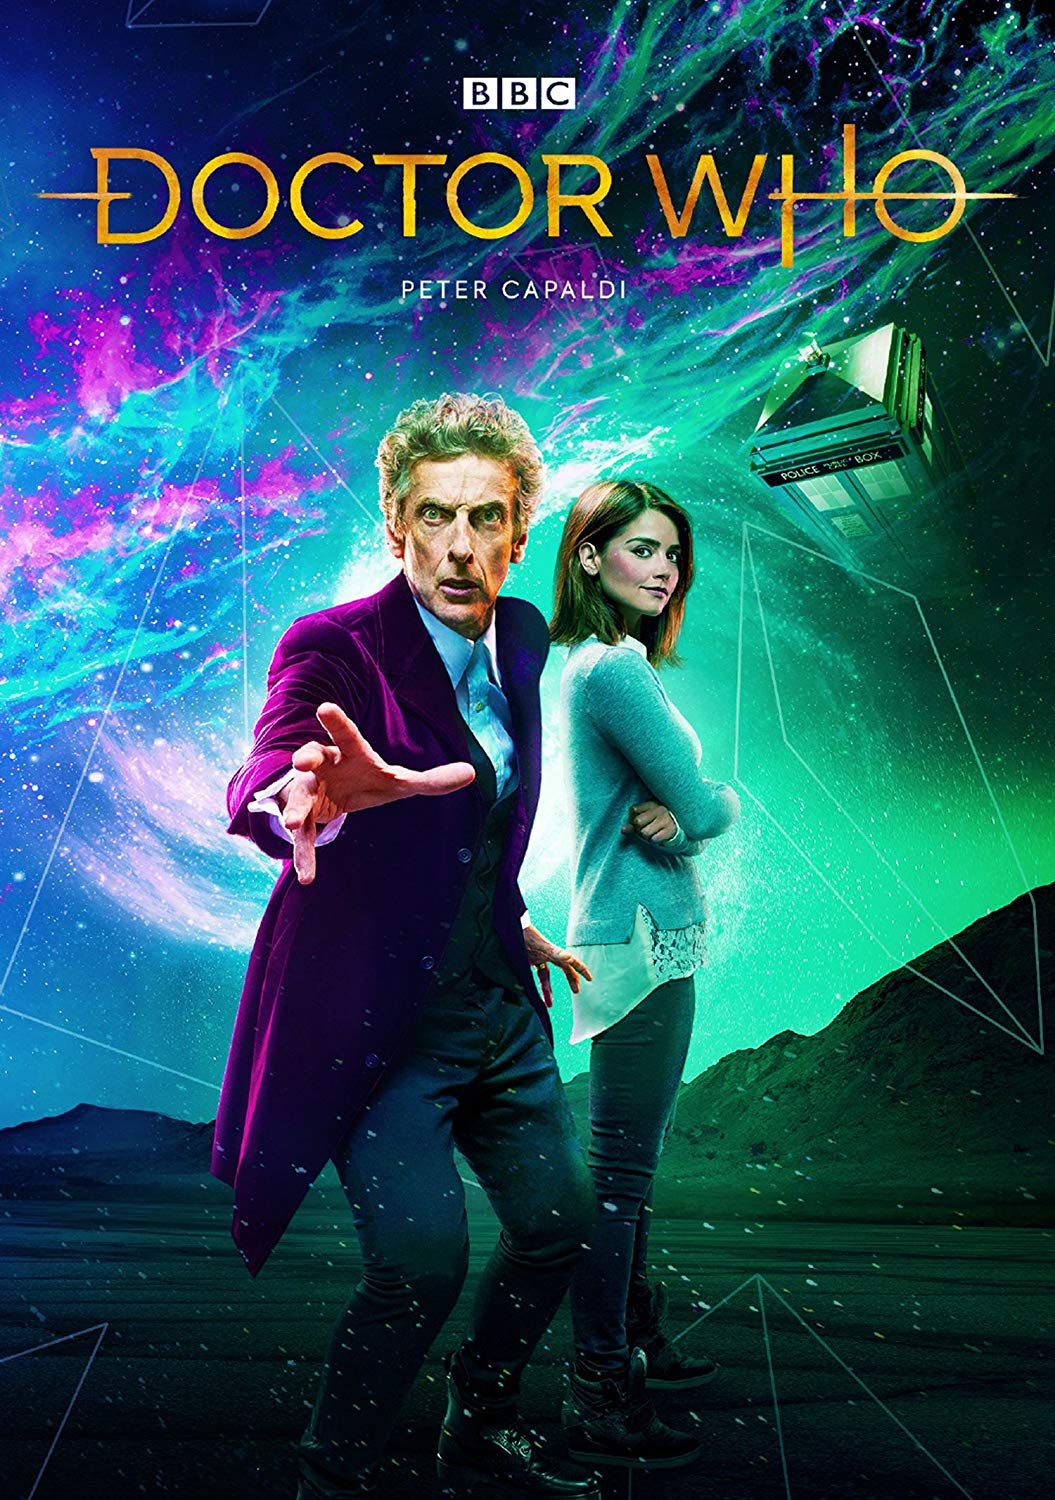 DOCTOR WHO: THE PETER CAPALDI COLLECTION cover art